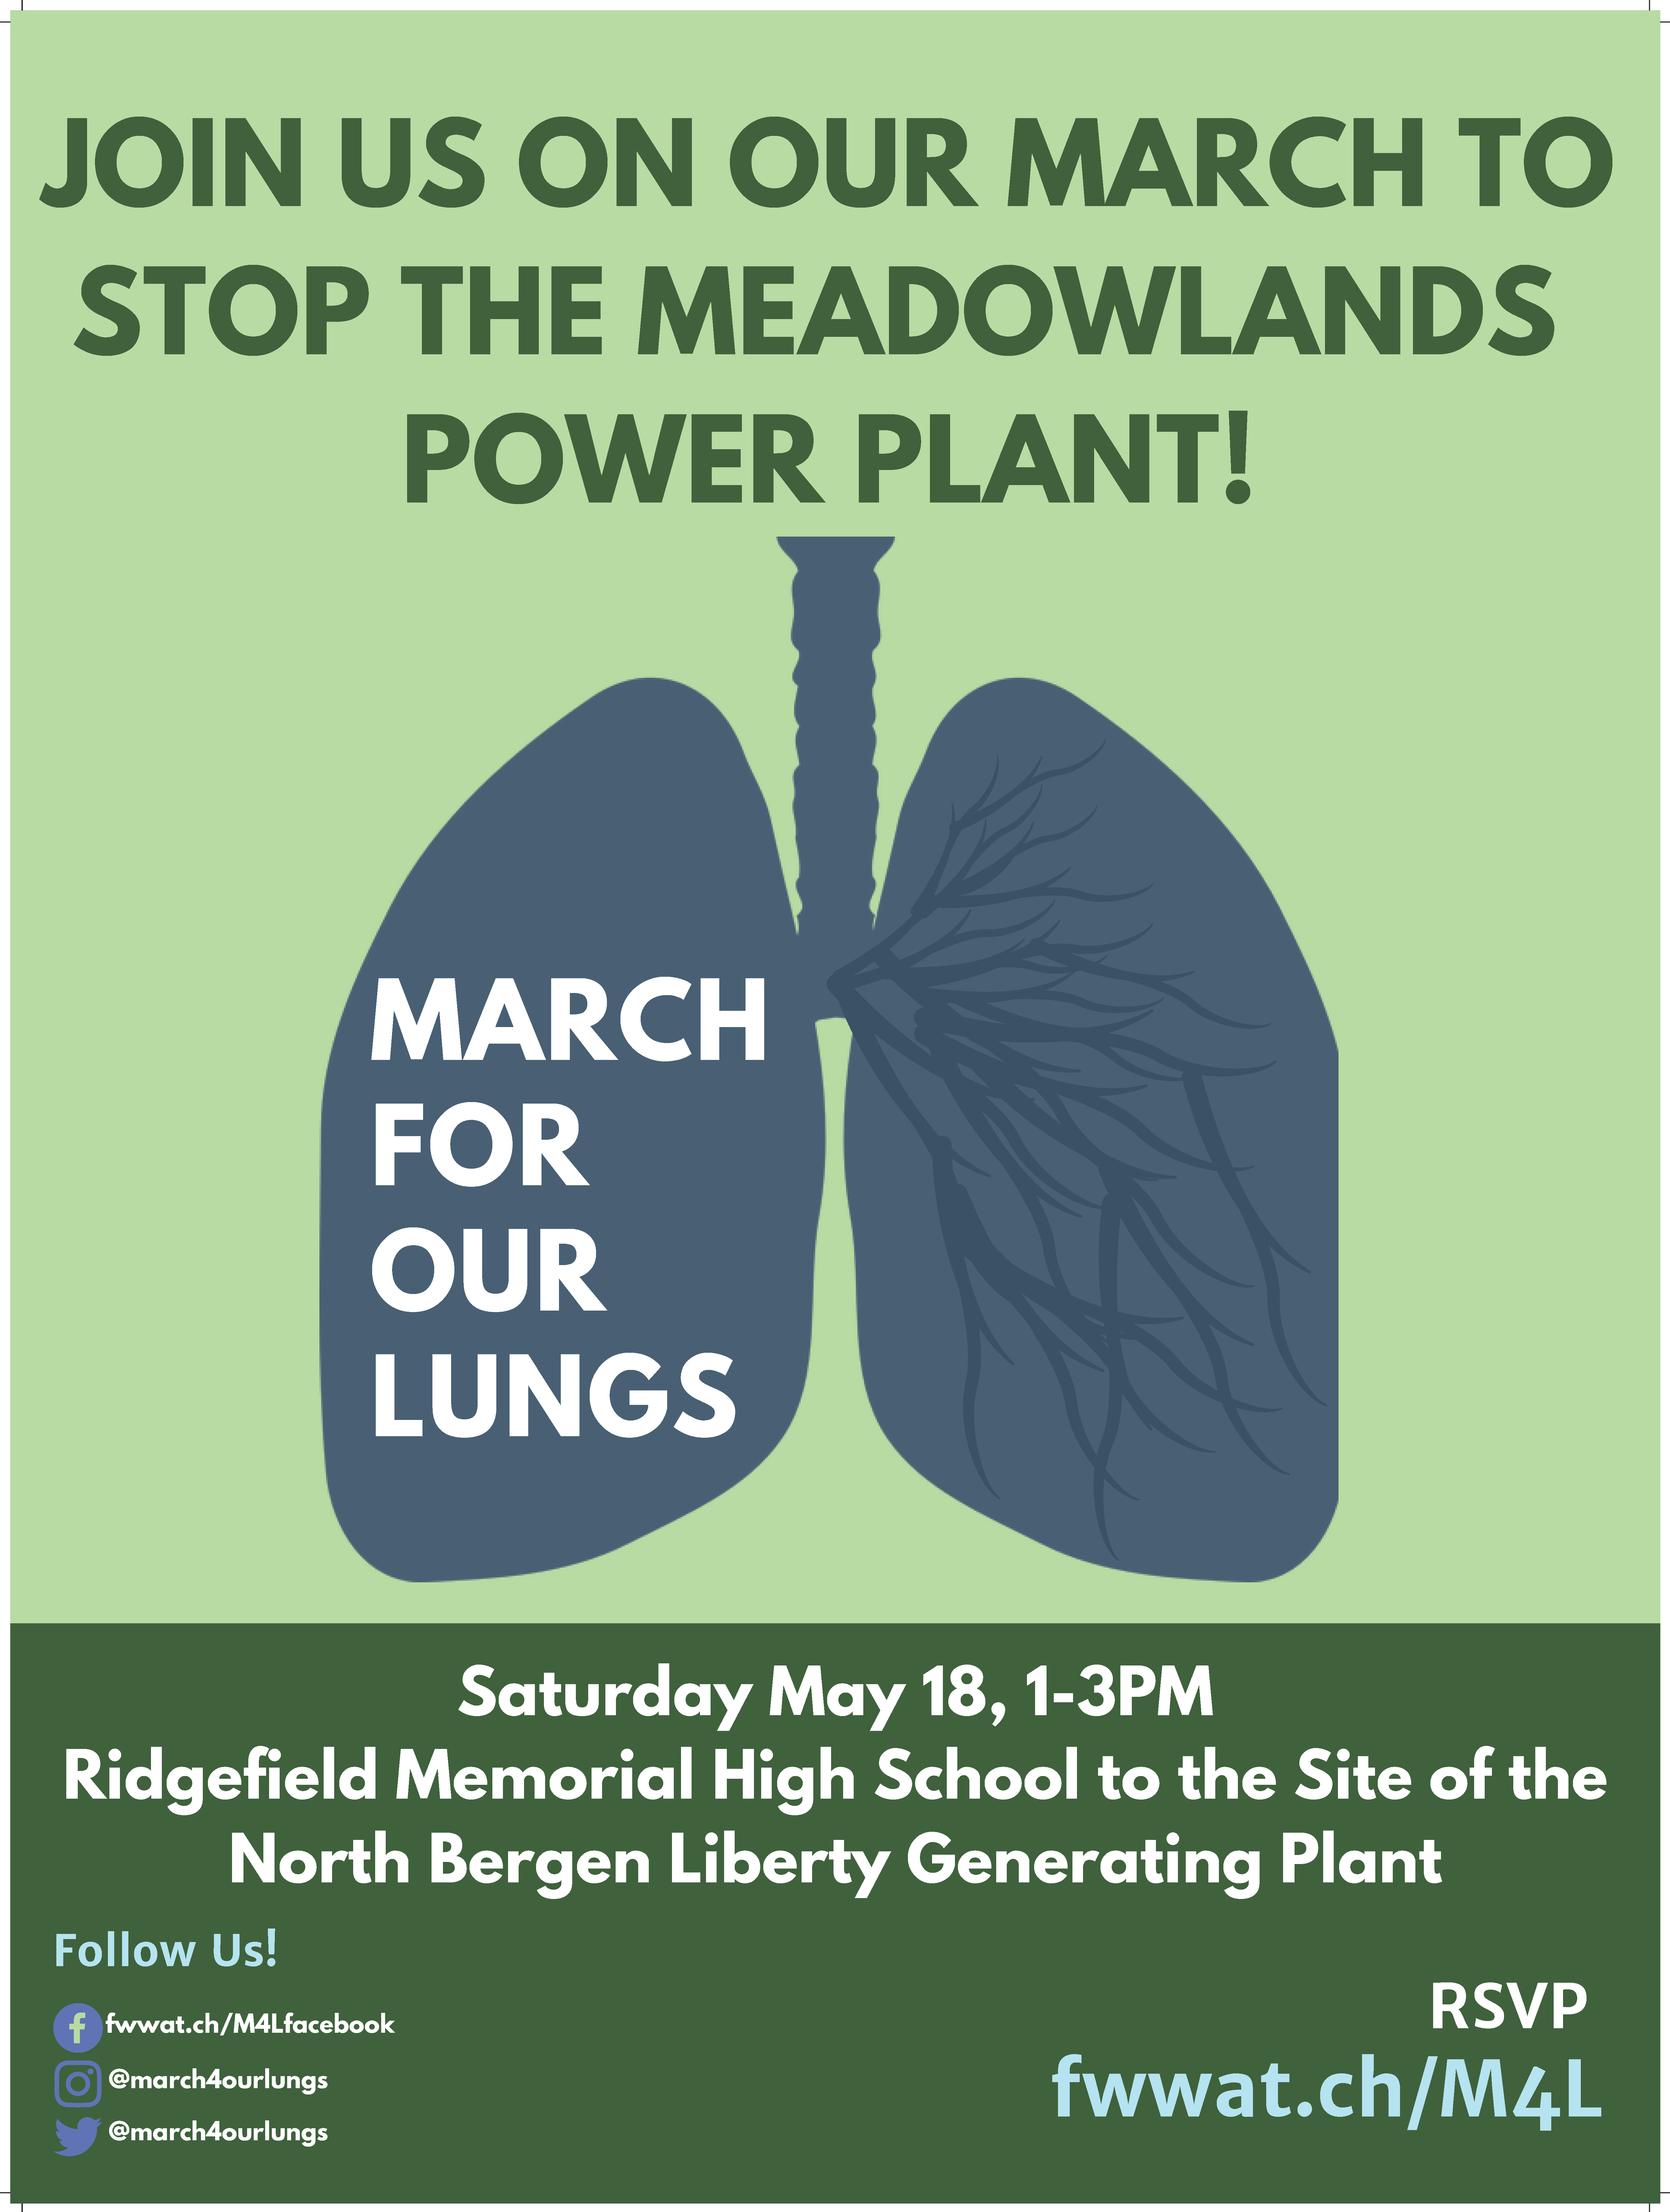 NJ Students Invite You to “March for Our Lungs” on May 18 in Ridgefield